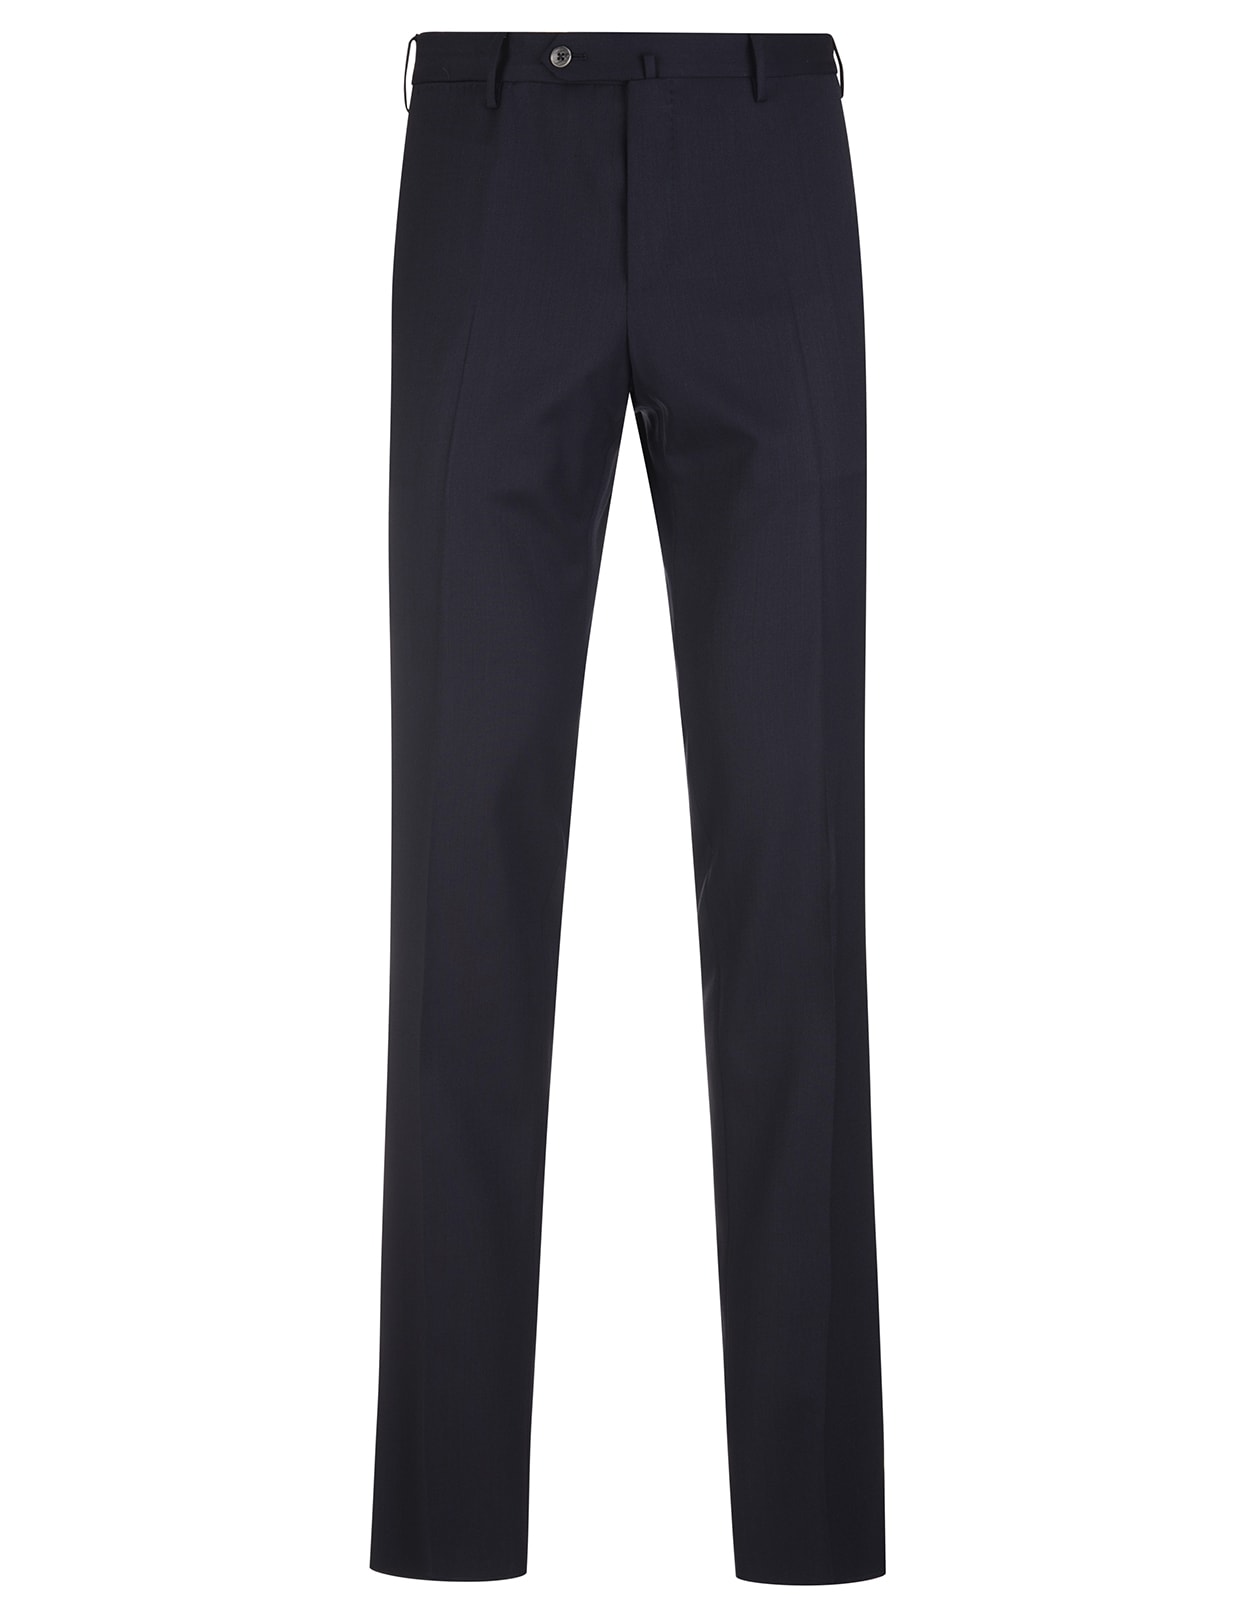 PT01 Man Slim Fit Tailored Trousers In Navy Blue Wool Blend